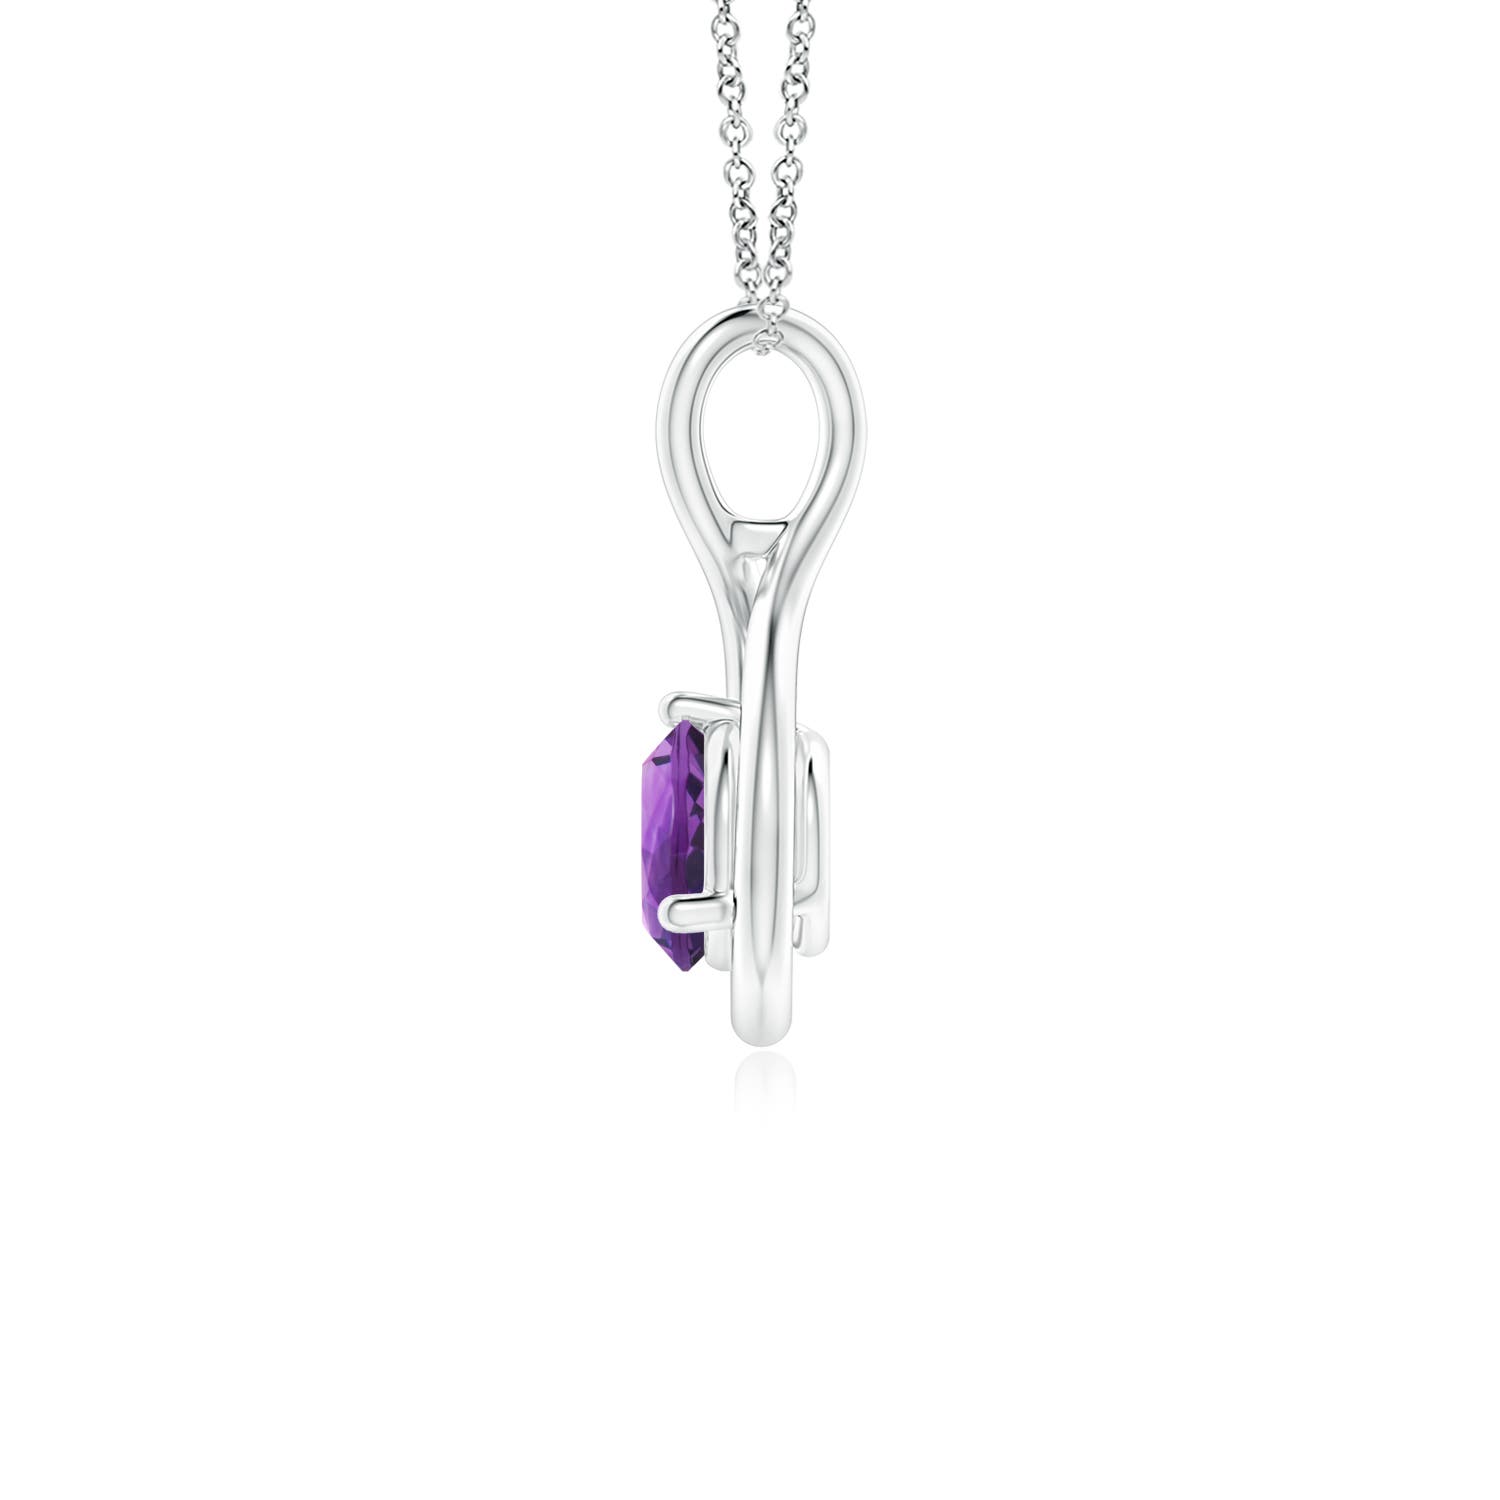 AAA - Amethyst / 0.45 CT / 14 KT White Gold